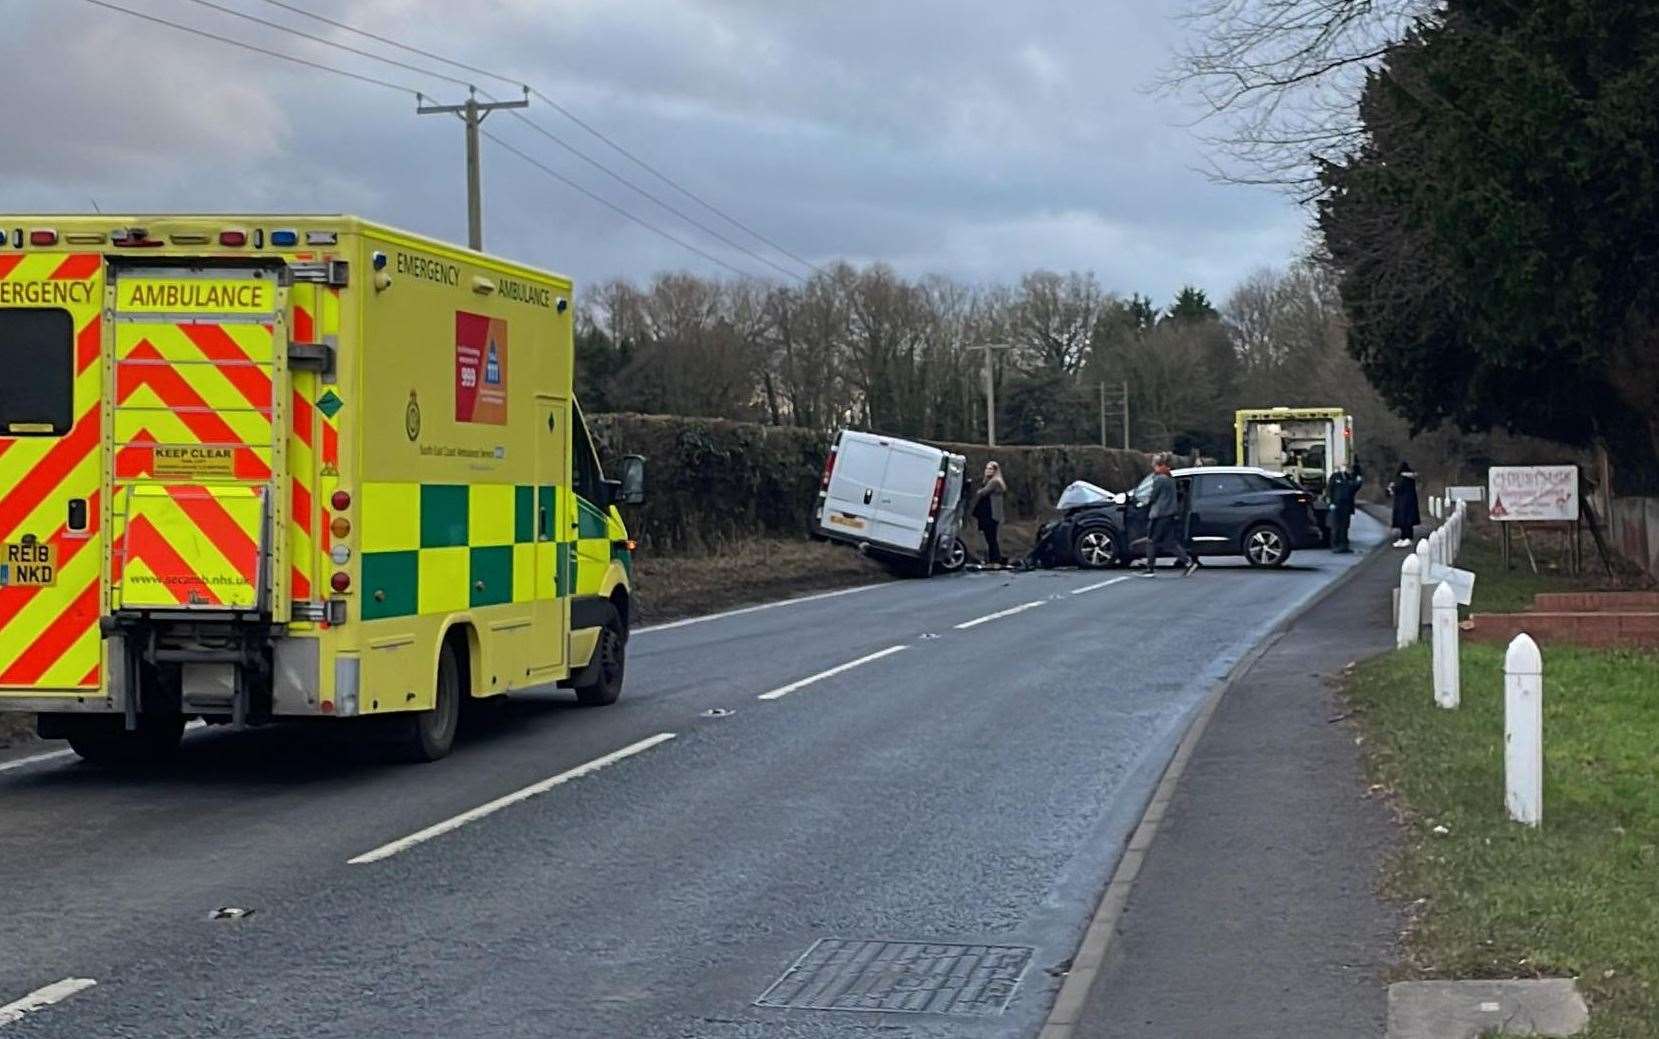 The accident has blocked the road between Ashford and Canterbury